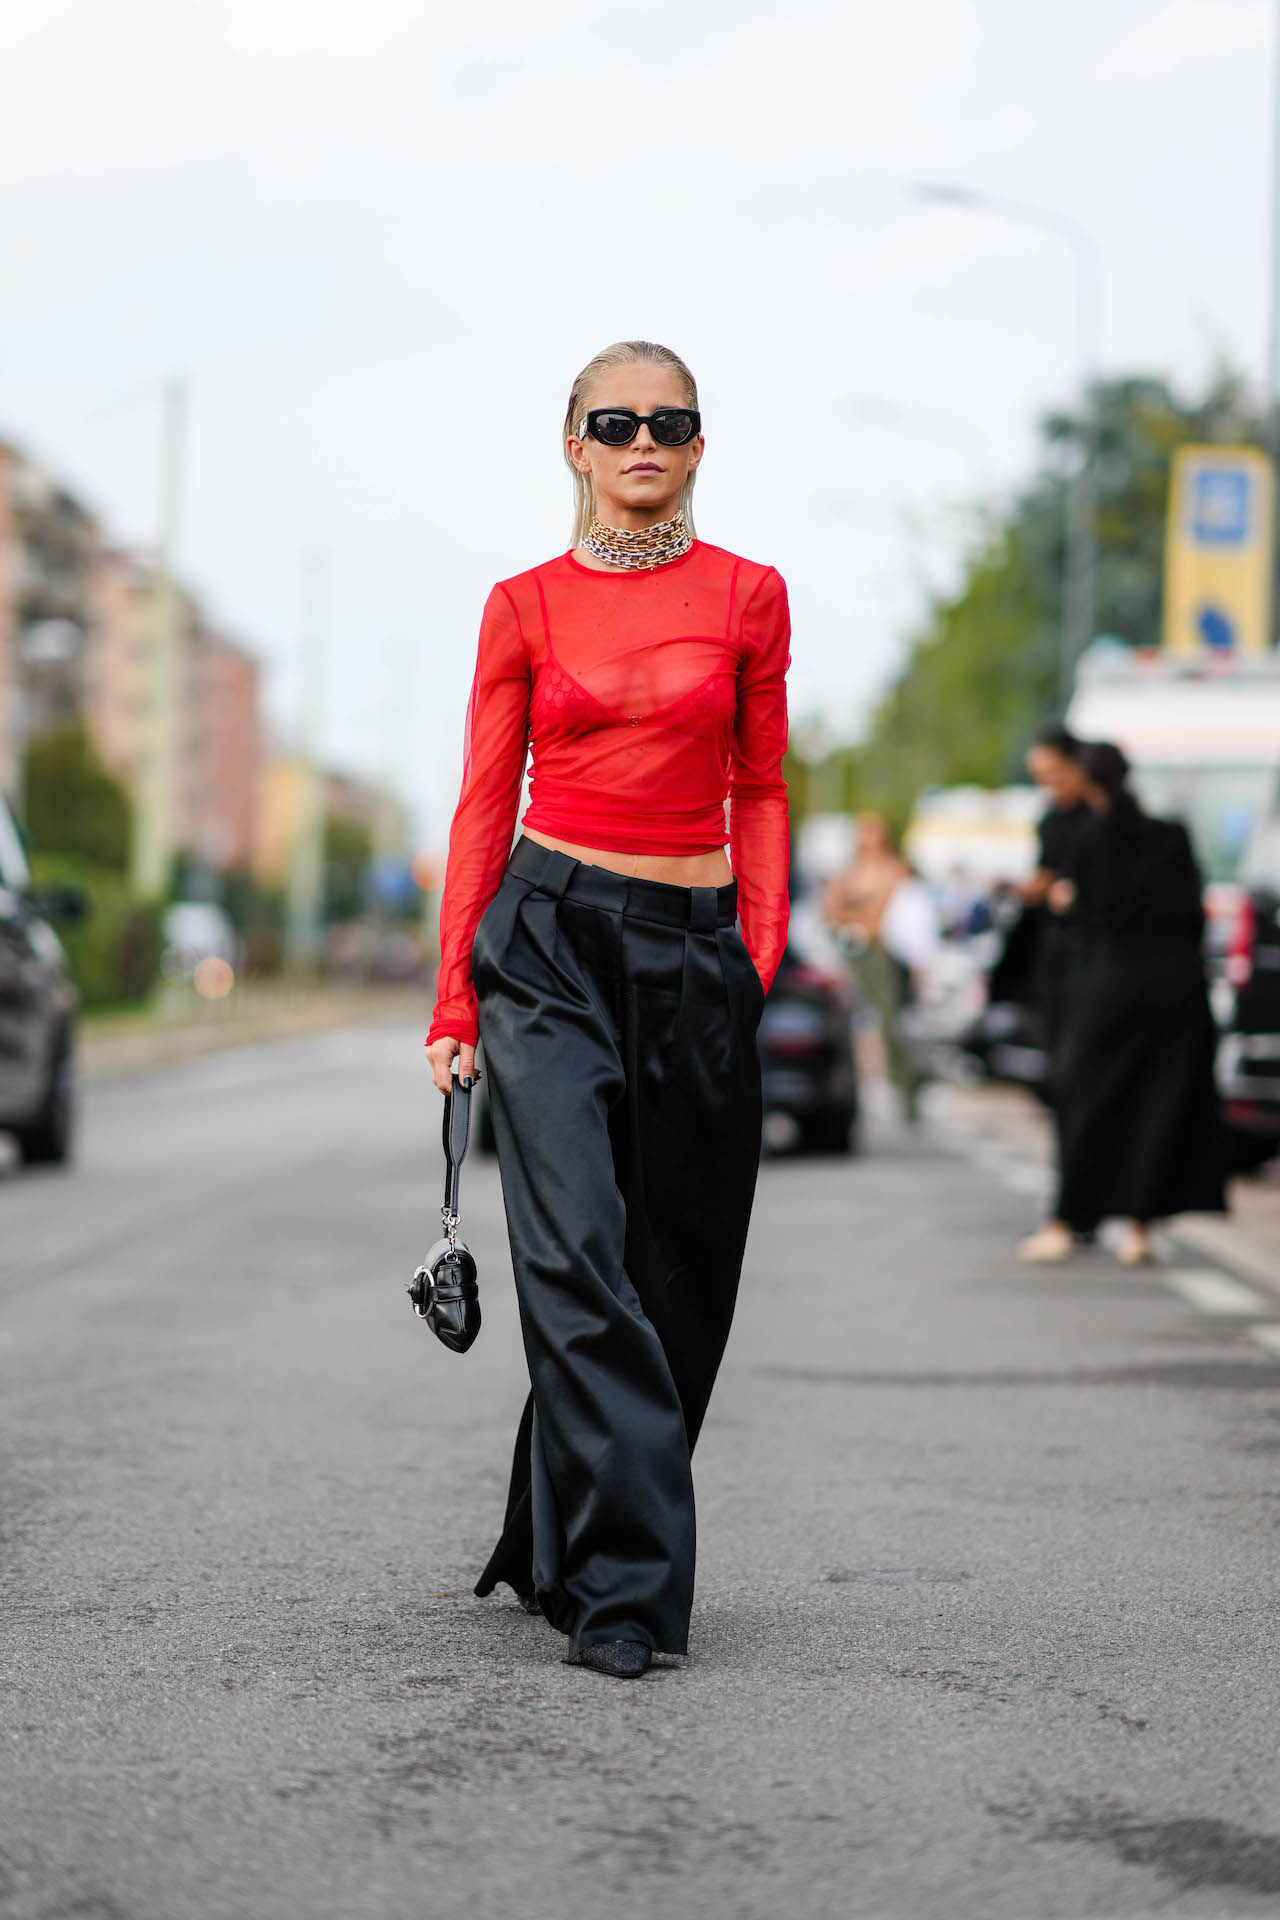 Let's talk fashion trends for fall 2023: BOLD REDS - so sexy